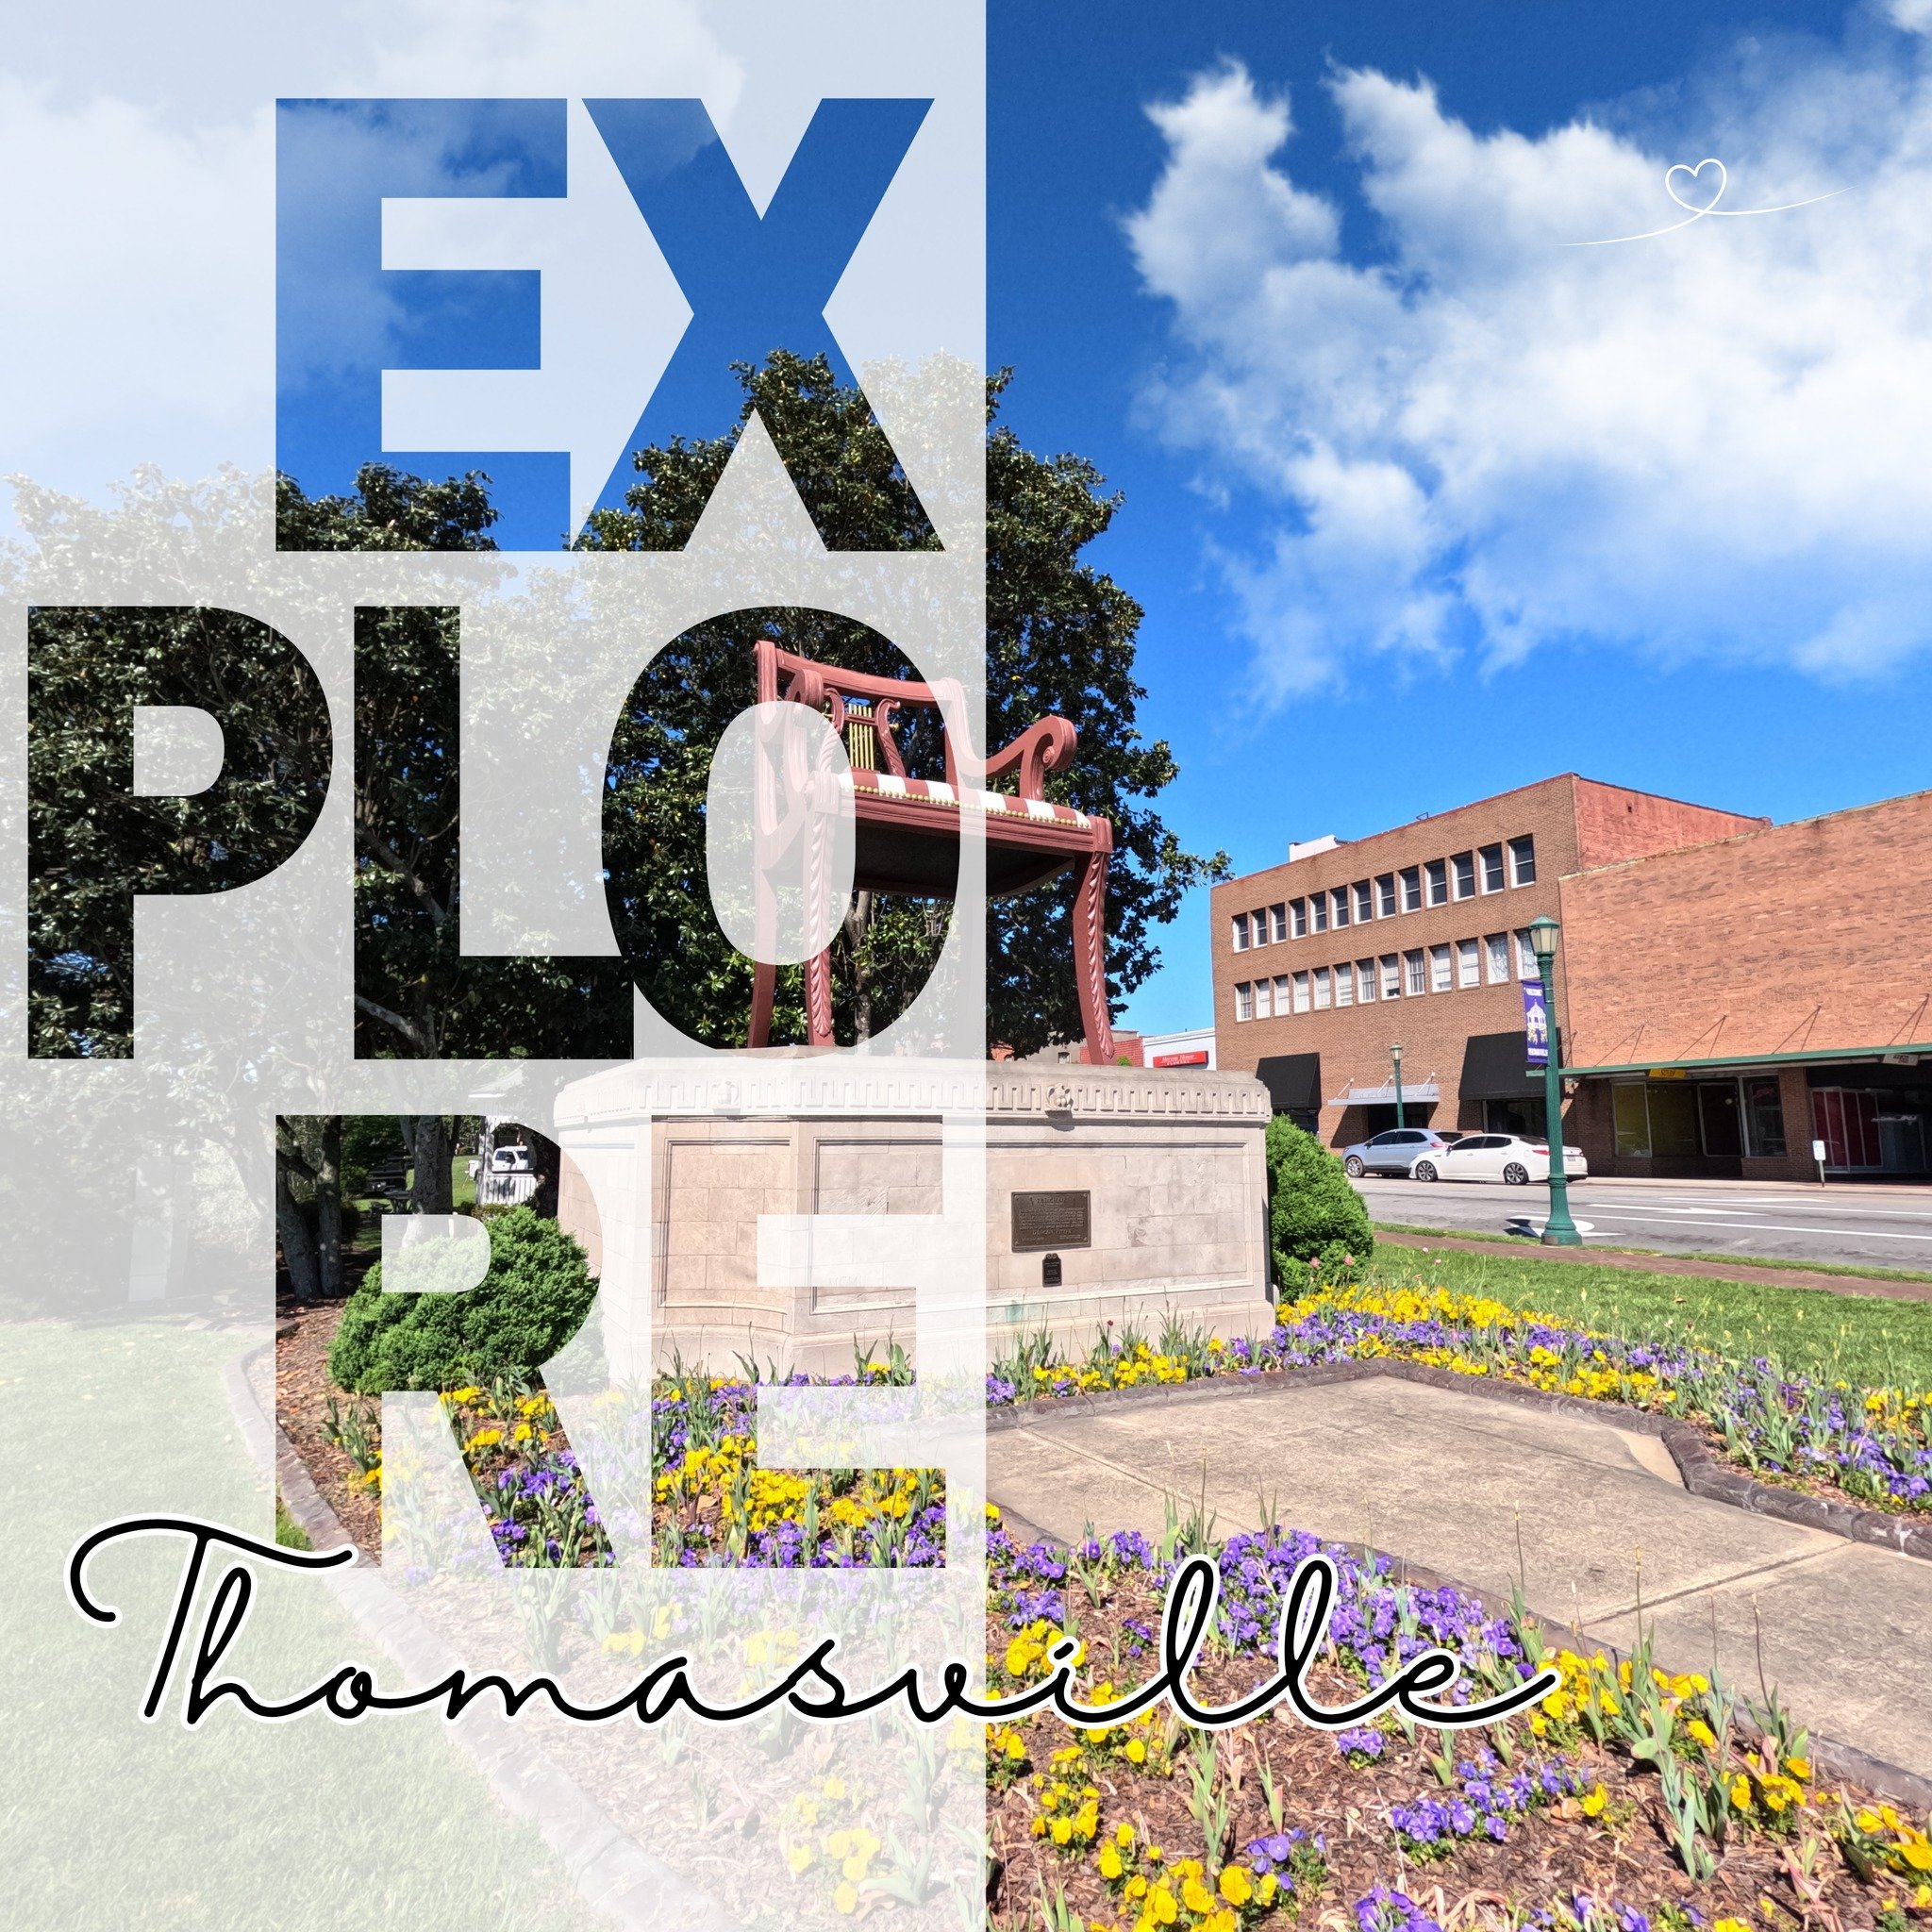 Explore Downtown Thomasville!
Discover the heartbeat of our vibrant town as you wander through the charming streets of Downtown Thomasville! From quaint boutiques to cozy cafes, there's something for everyone to enjoy. Take a stroll down Main Street 